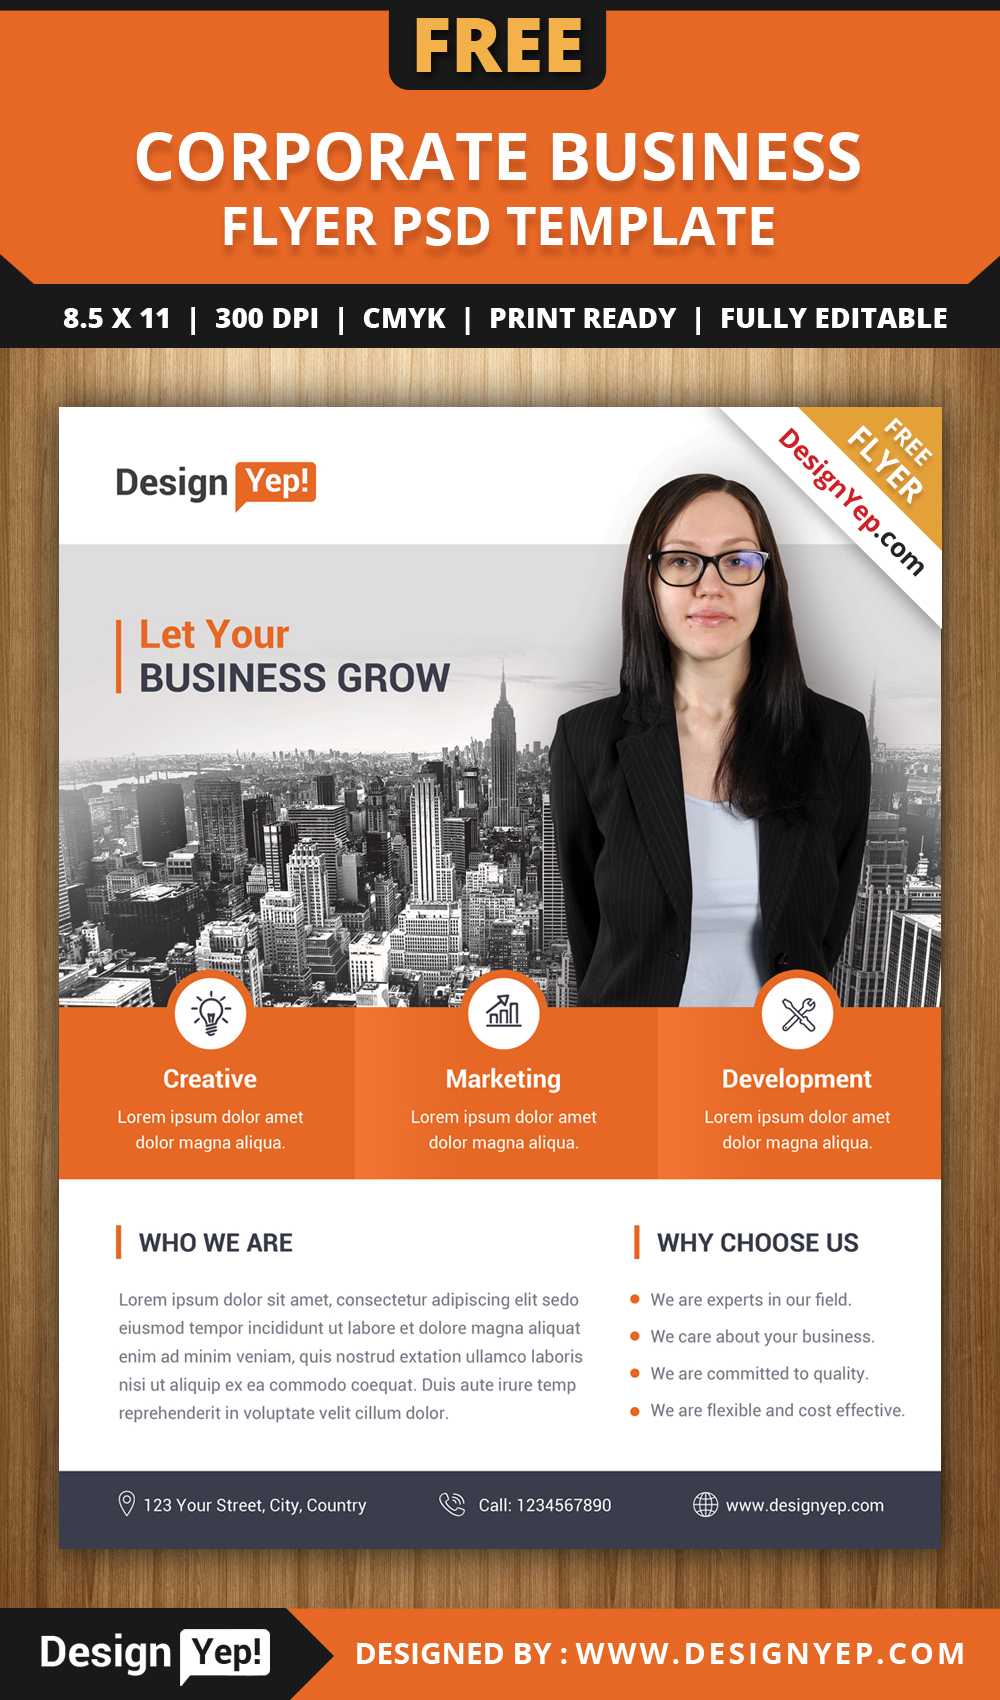 004 Microsoft Word Business Flyer Templates Free Corporate Intended For Free Business Flyer Templates For Microsoft Word